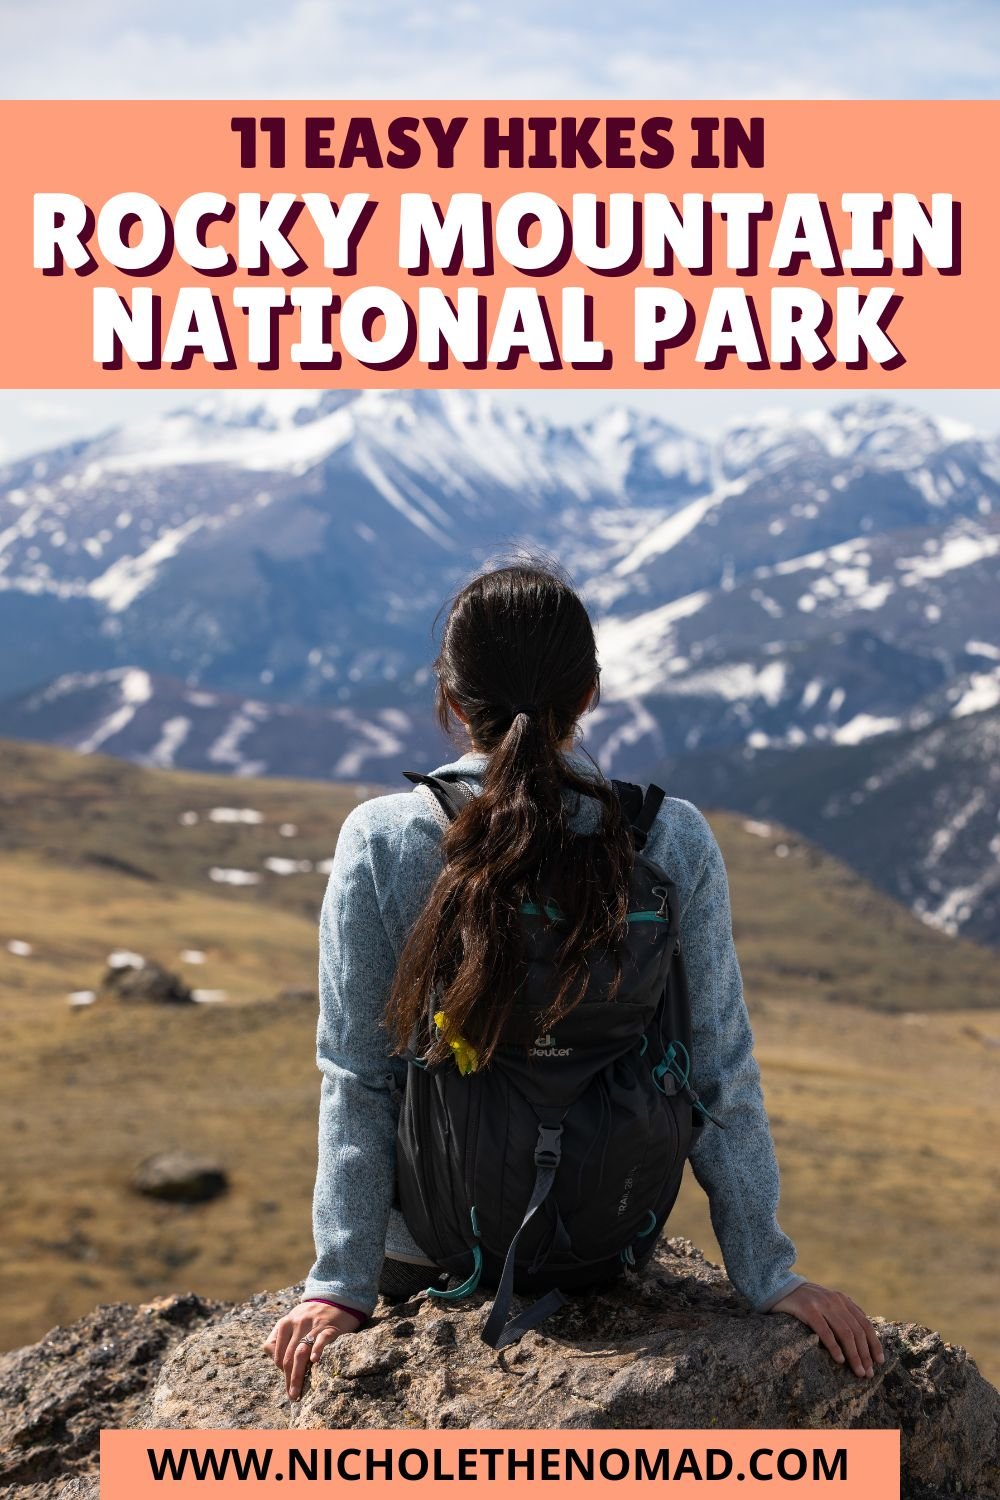 11 Easy Hikes in Rocky Mountain National Park — Nichole the Nomad